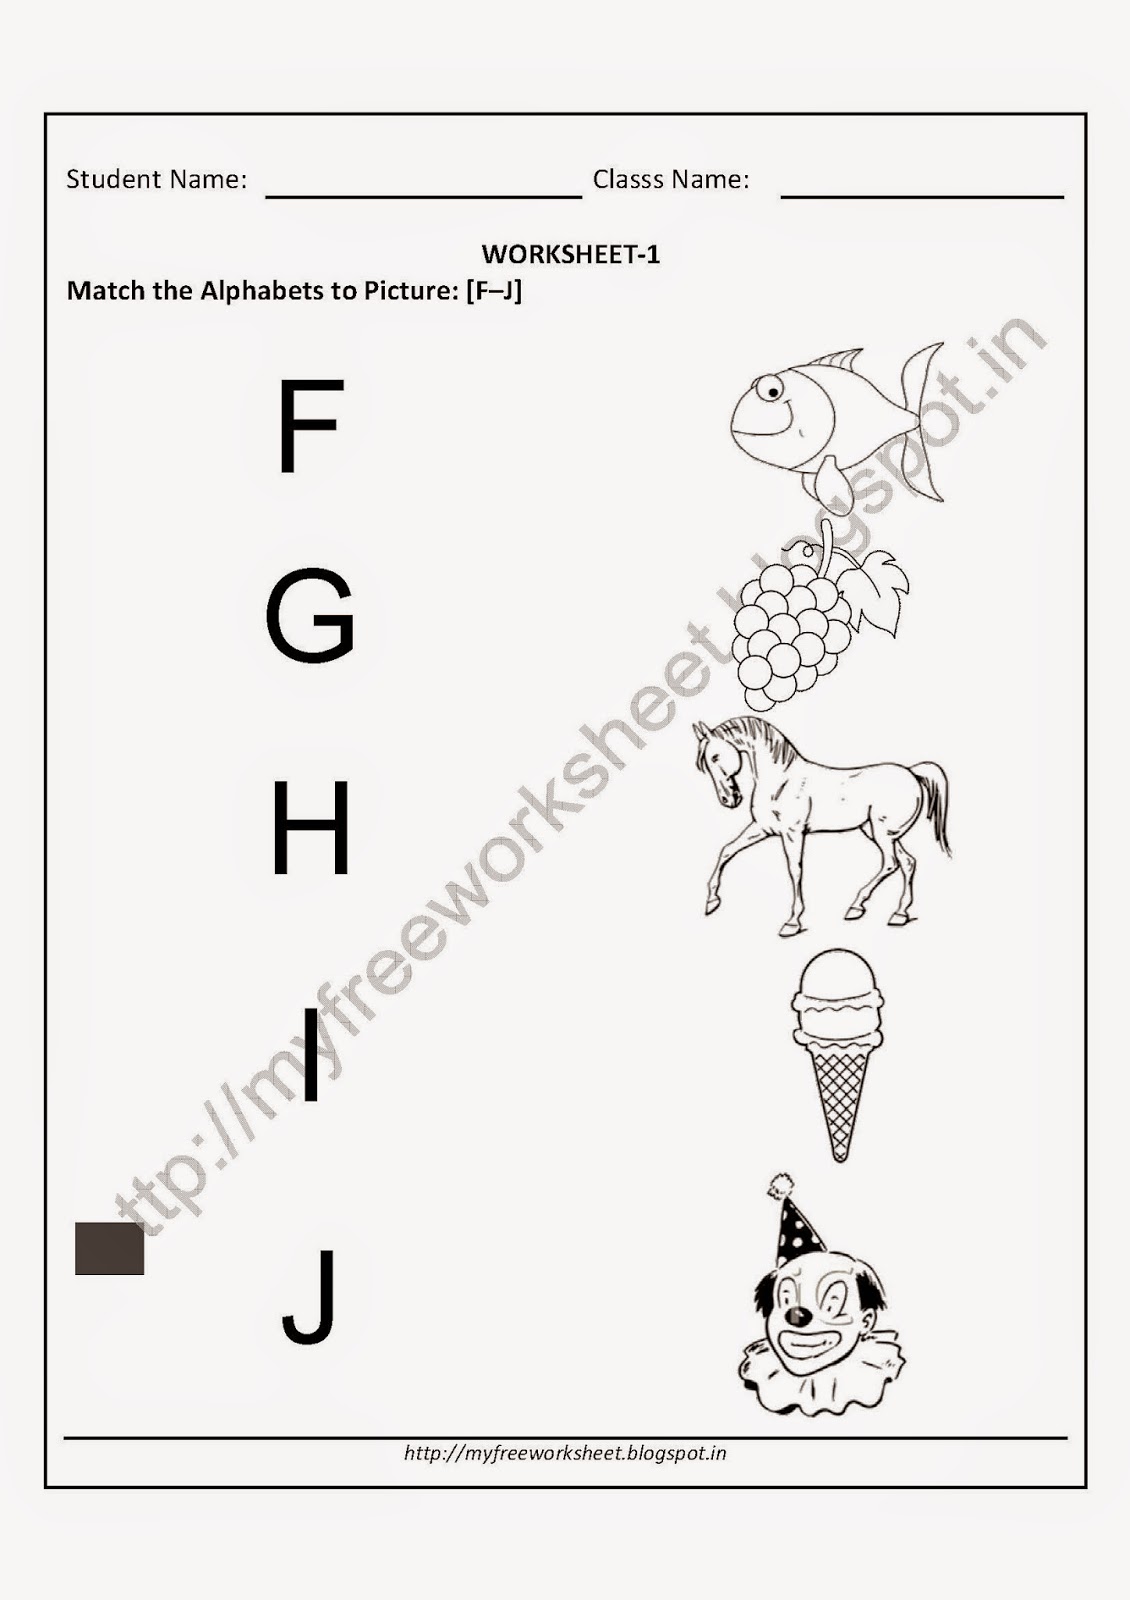 english-match-the-letters-a-z-activities-fims-schools